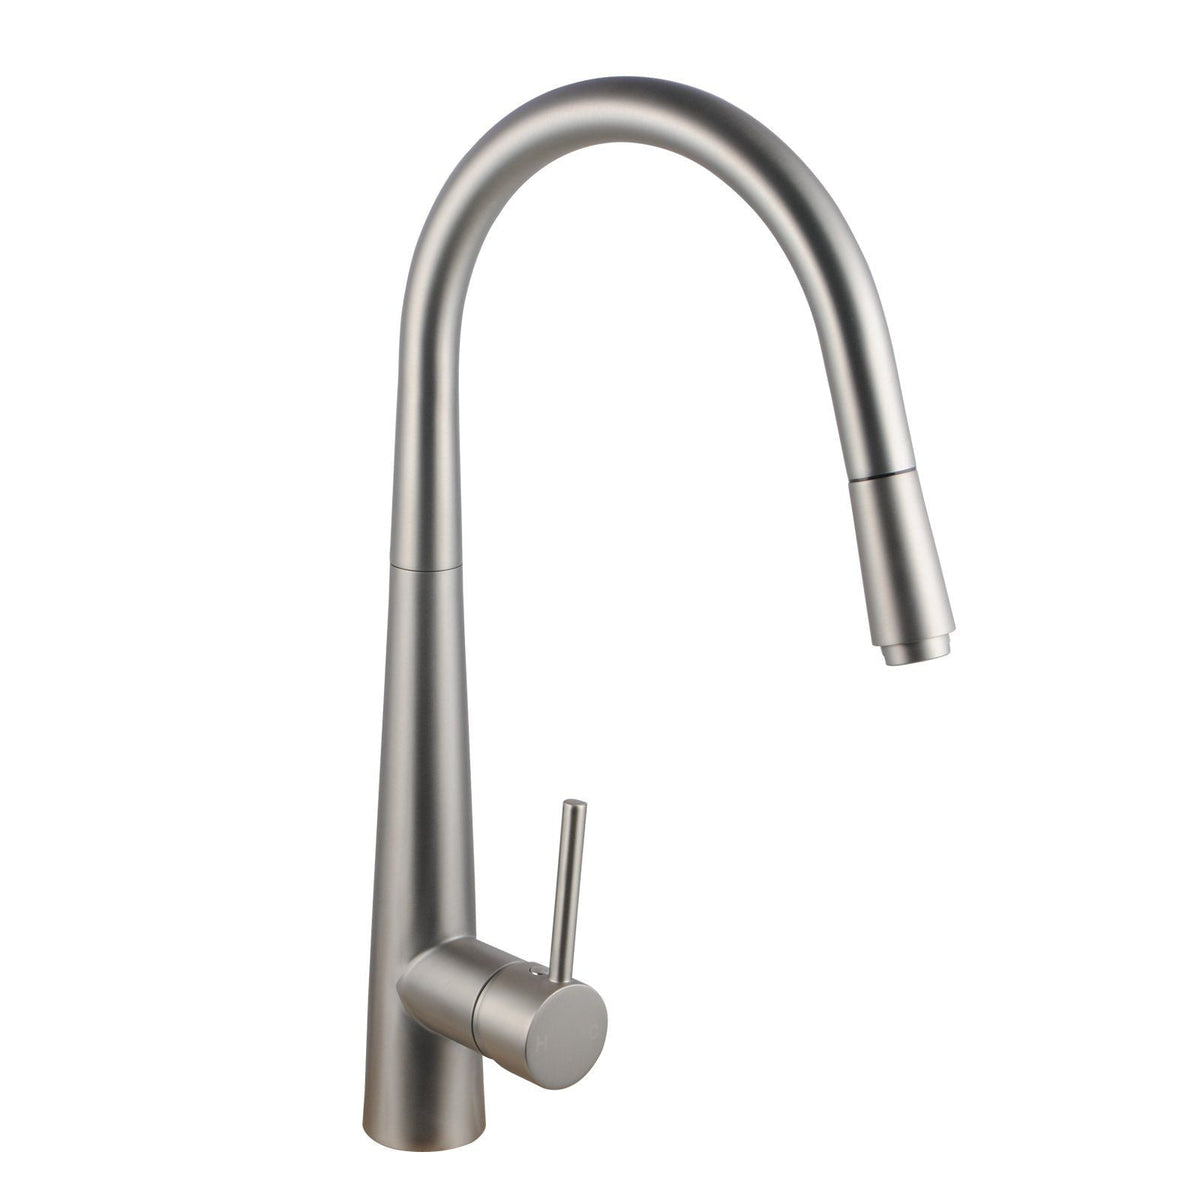 Round Brushed Nickel Pull Out Kitchen Sink Mixer Tap